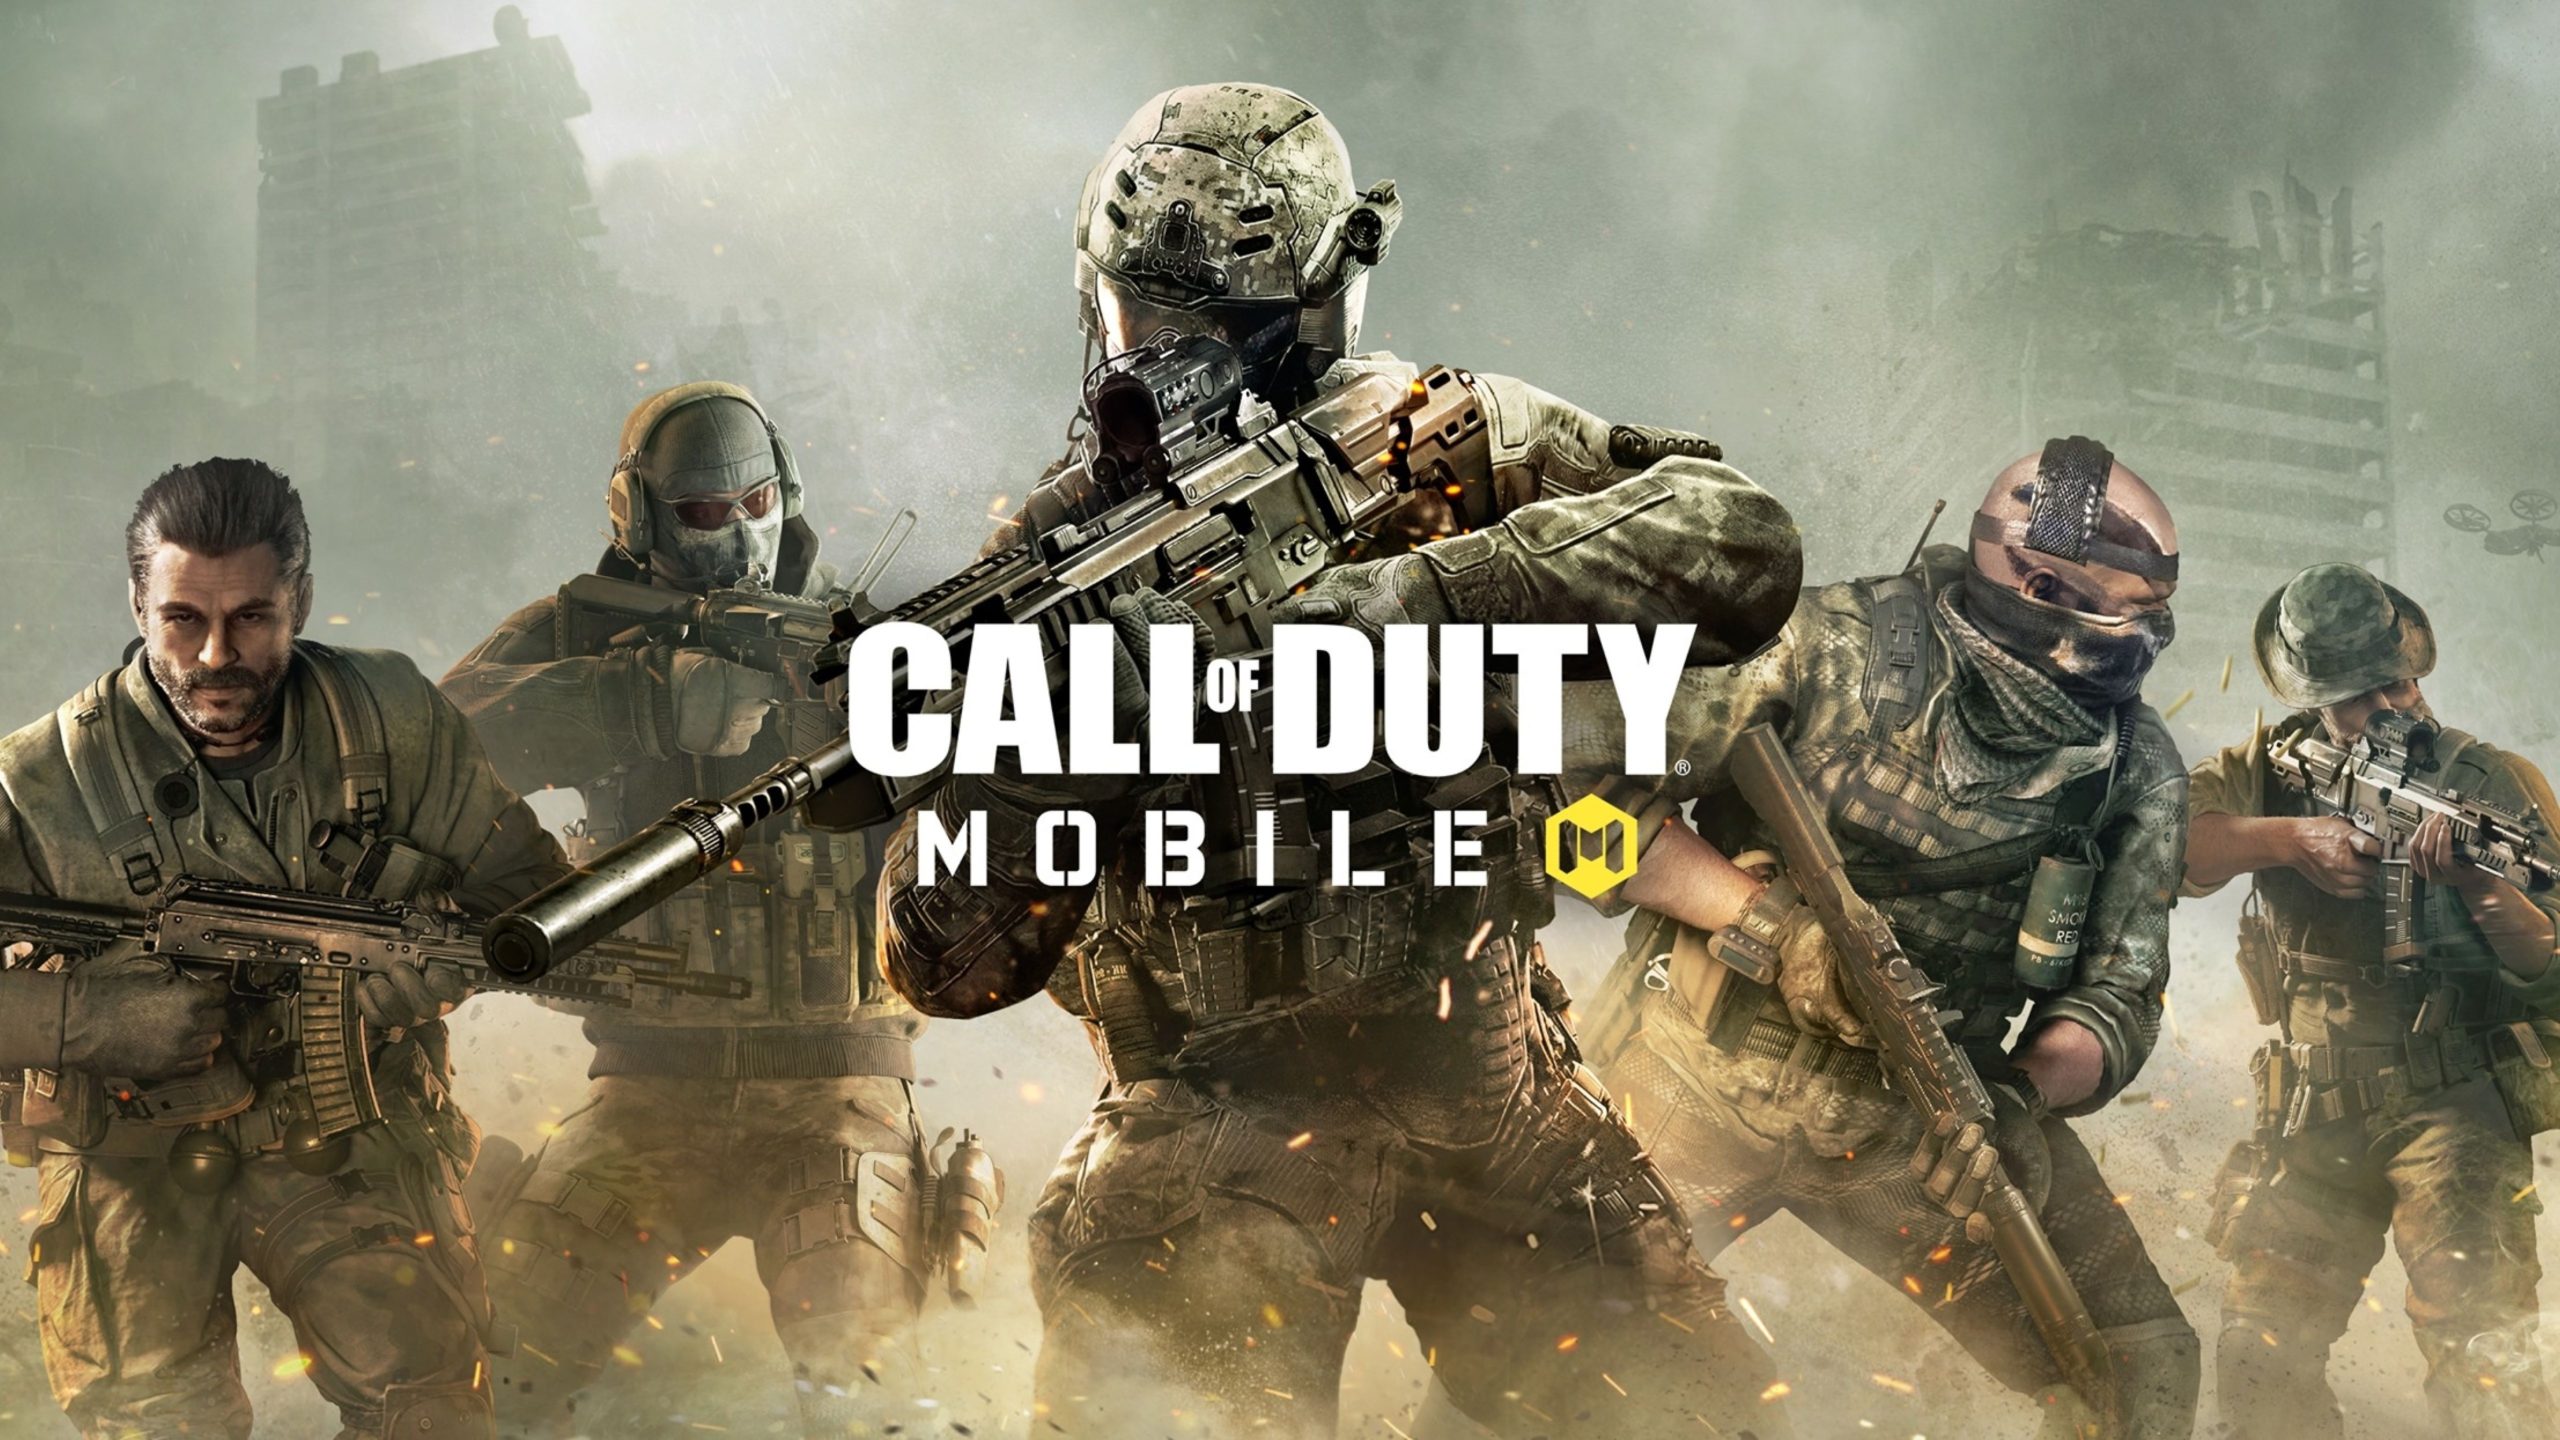 Call of Duty Mobile with soldiers and rifles